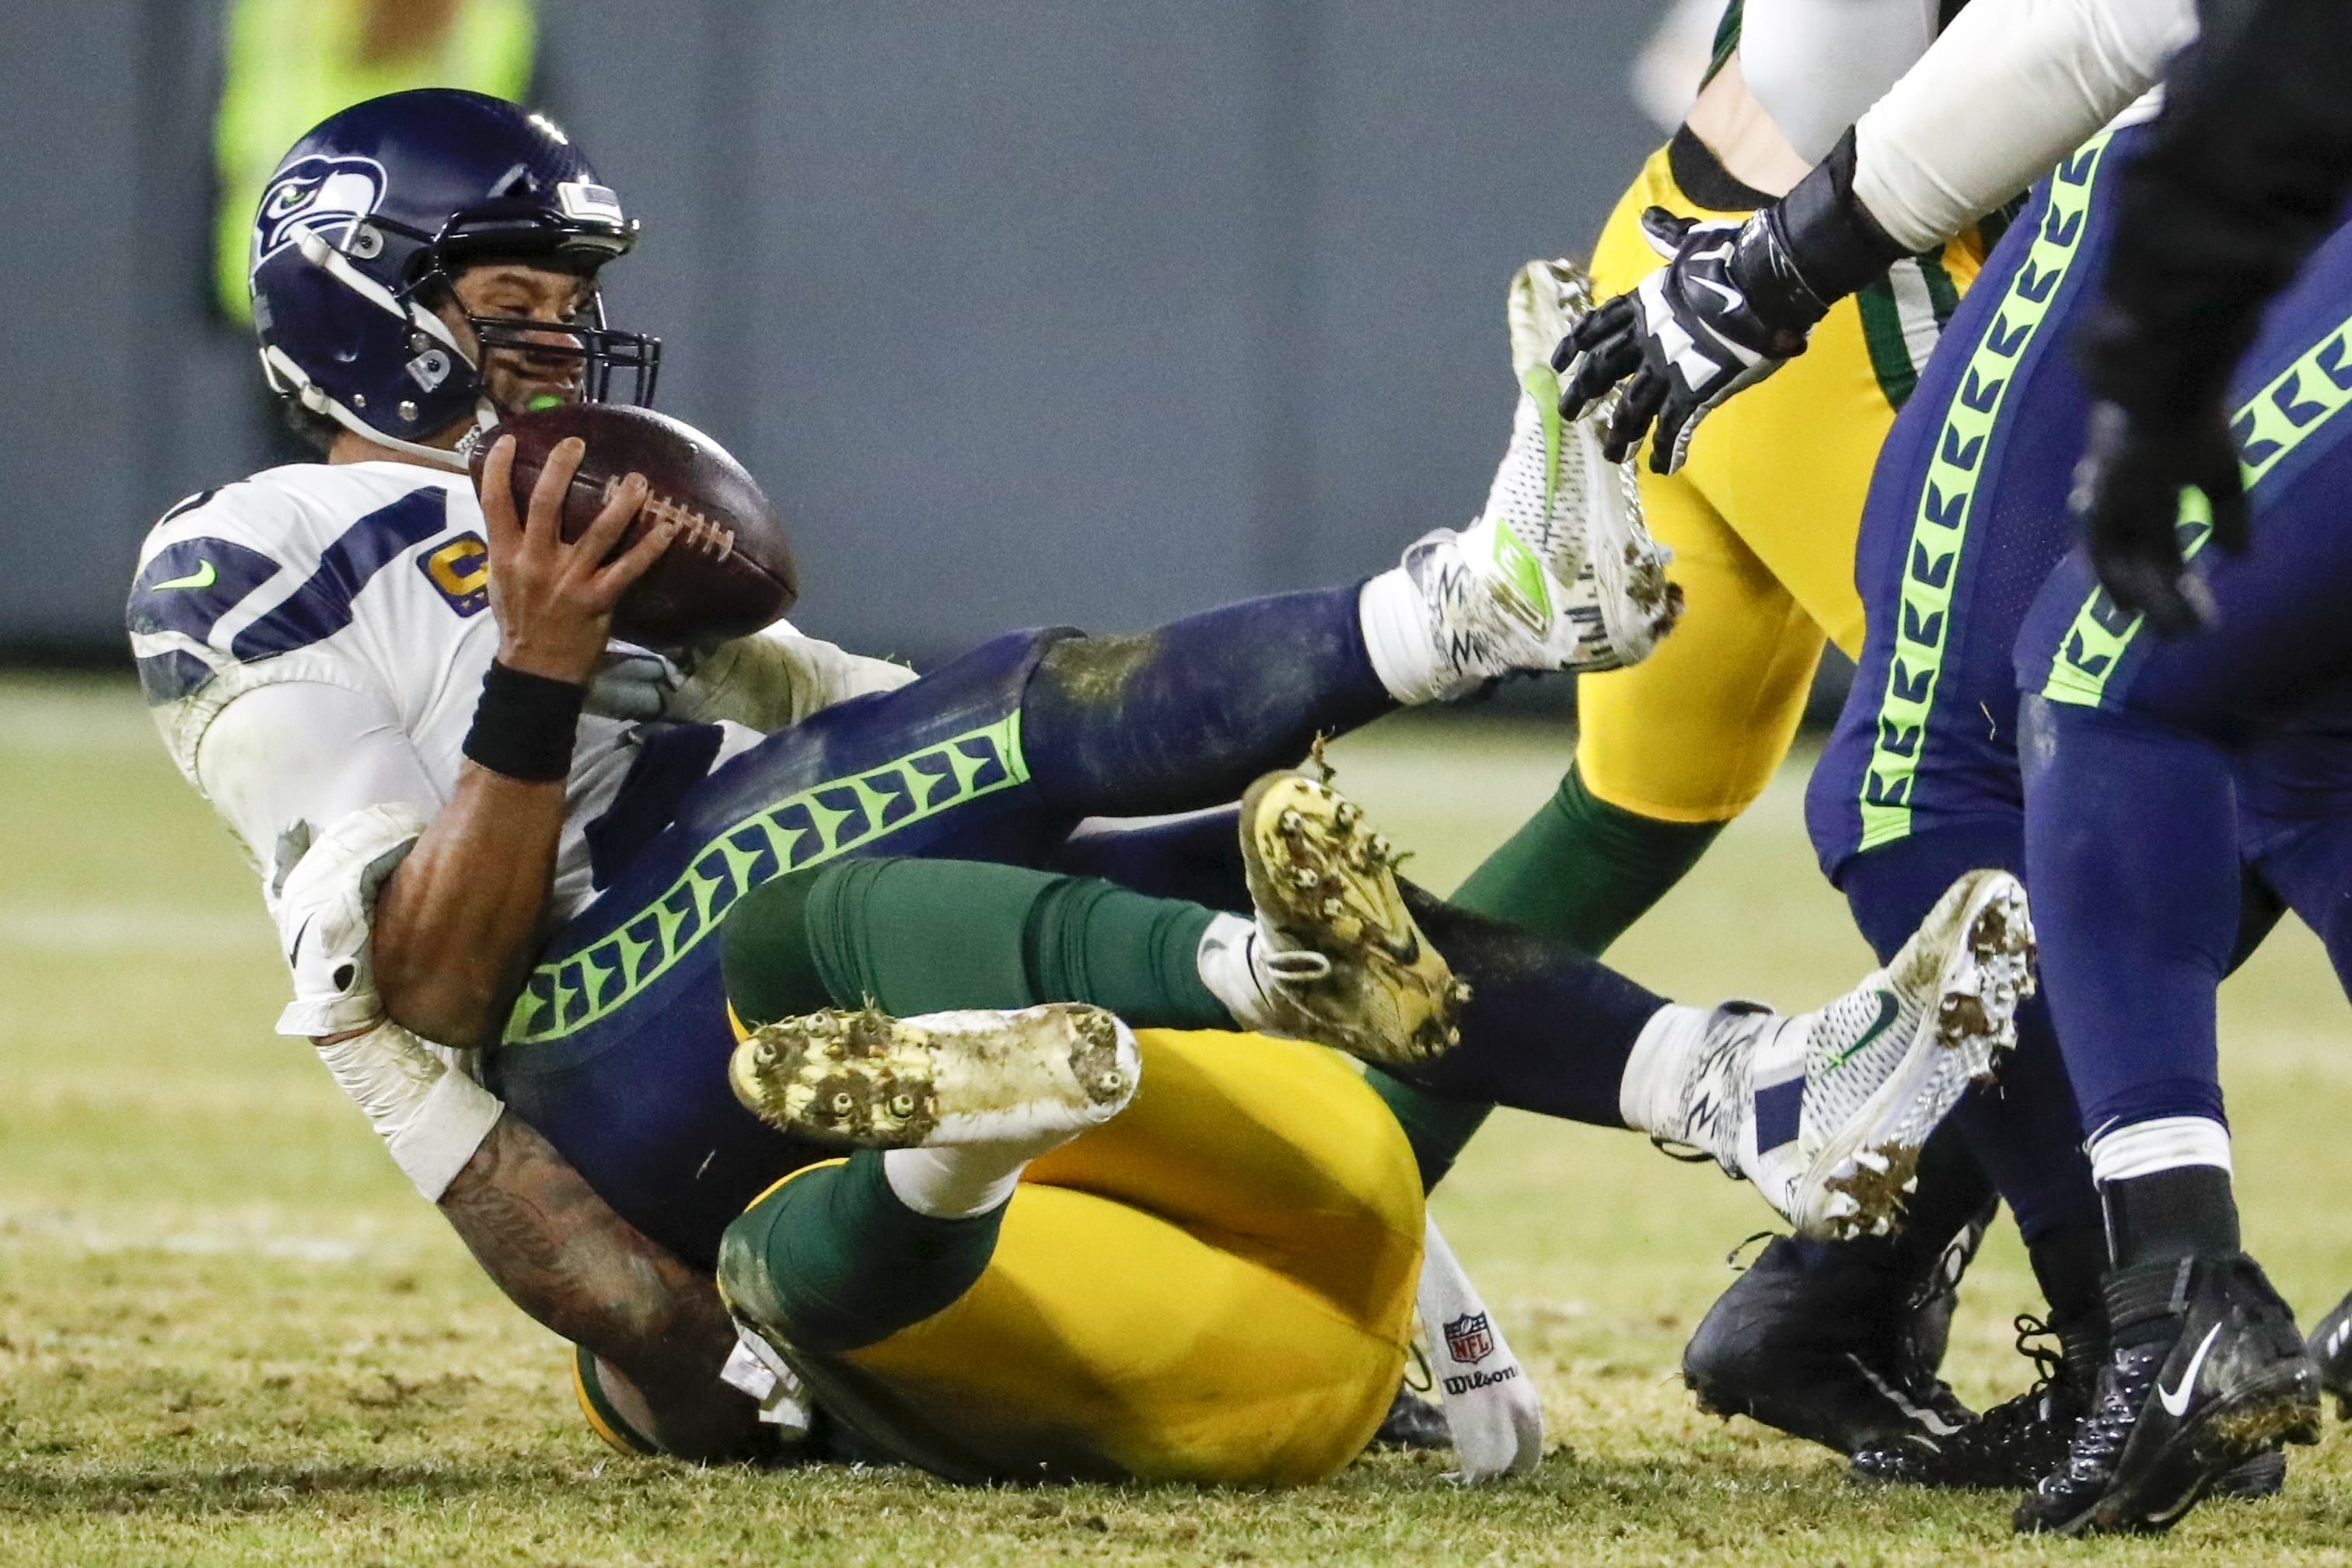 Green Bay Packers' Preston Smith sacks Seattle Seahawks' Russell Wilson during the second half of an NFL divisional playoff football game Sunday, Jan. 12, 2020, in Green Bay, Wis.